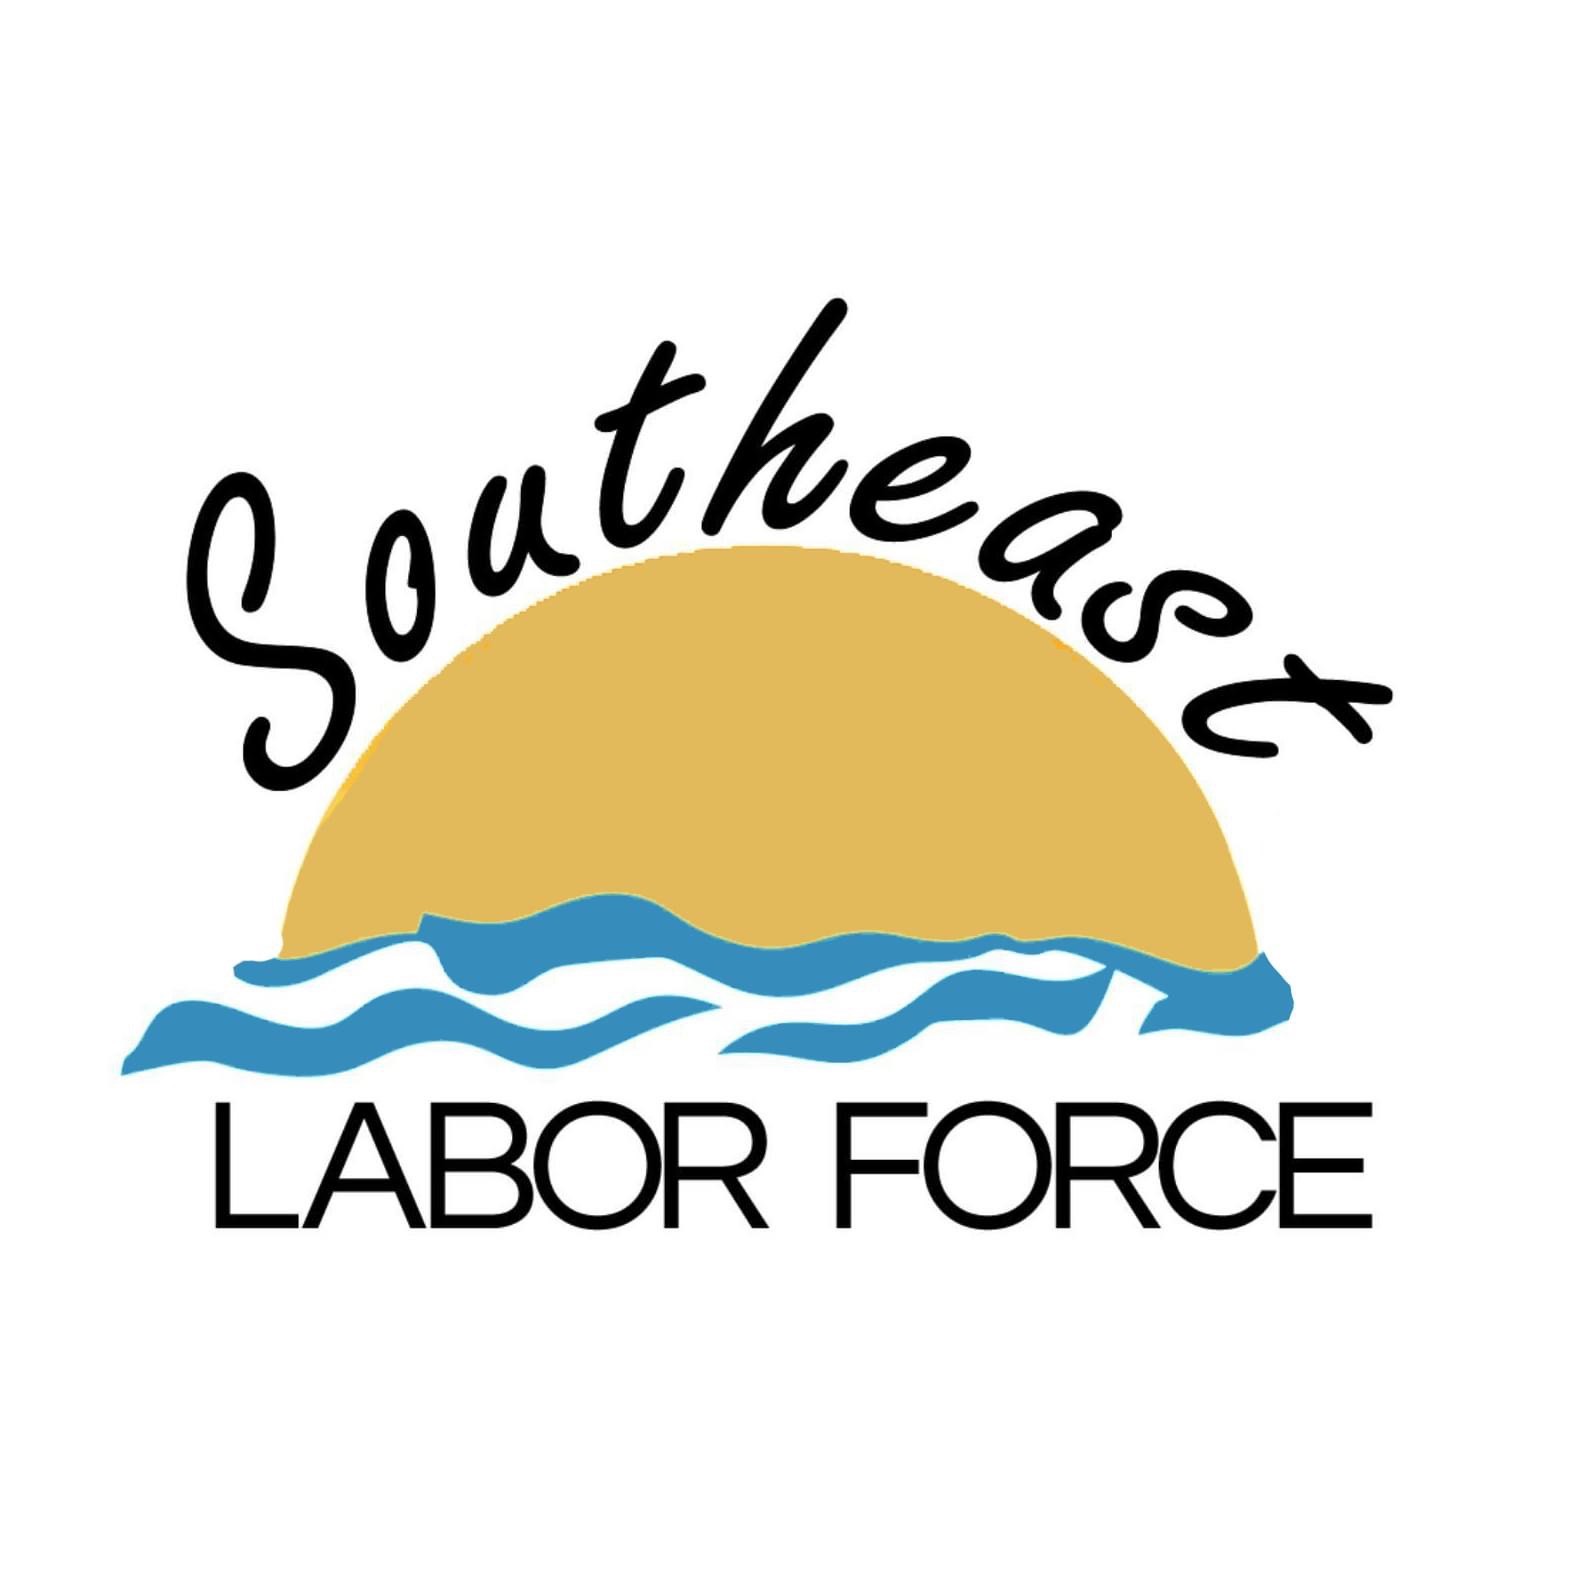 Southeast Contracting Services - Logo Revised